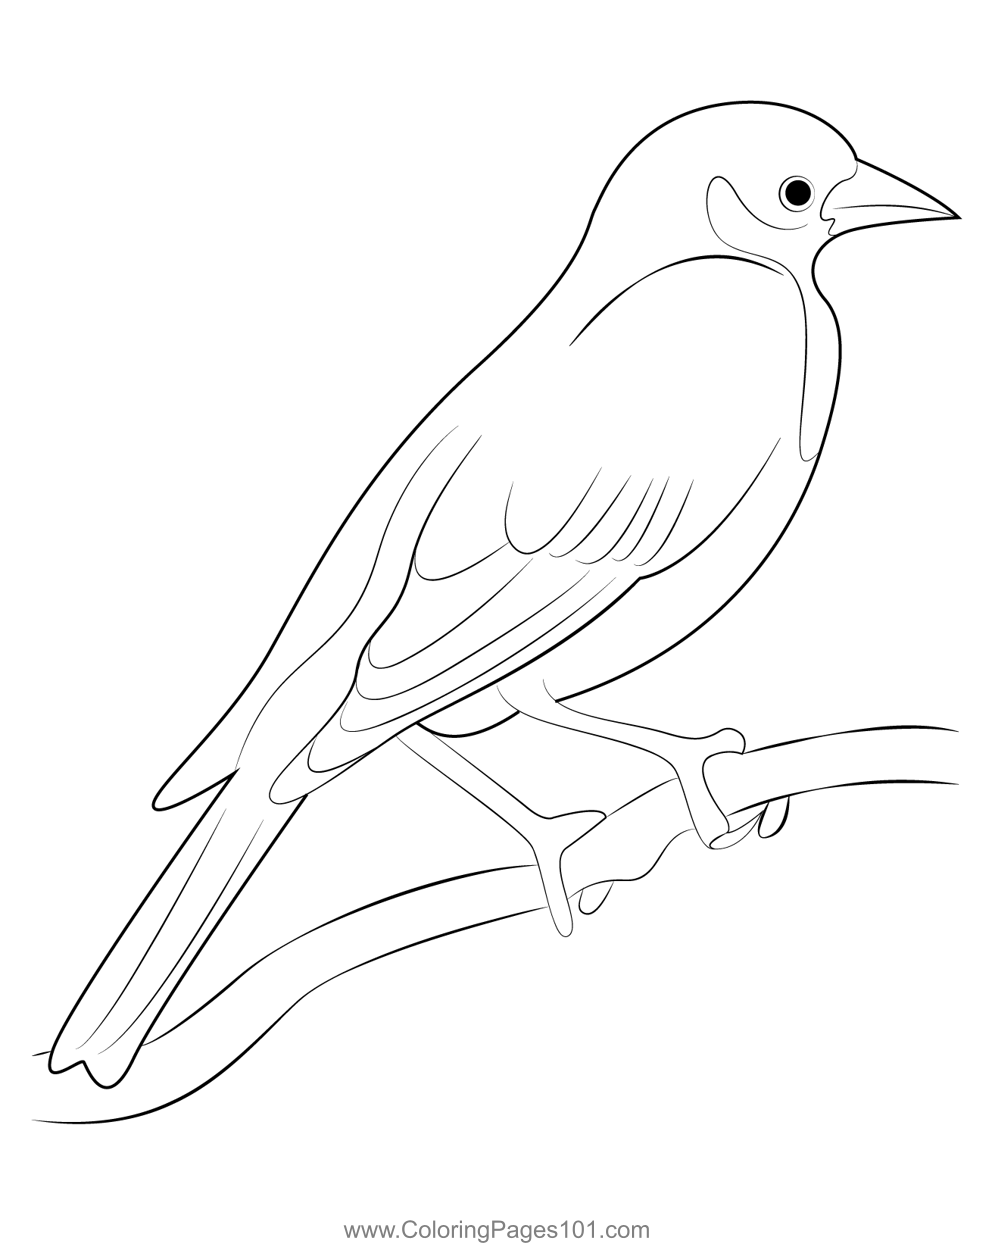 Female Yellow Headed Blackbird Coloring Page for Kids - Free New World ...